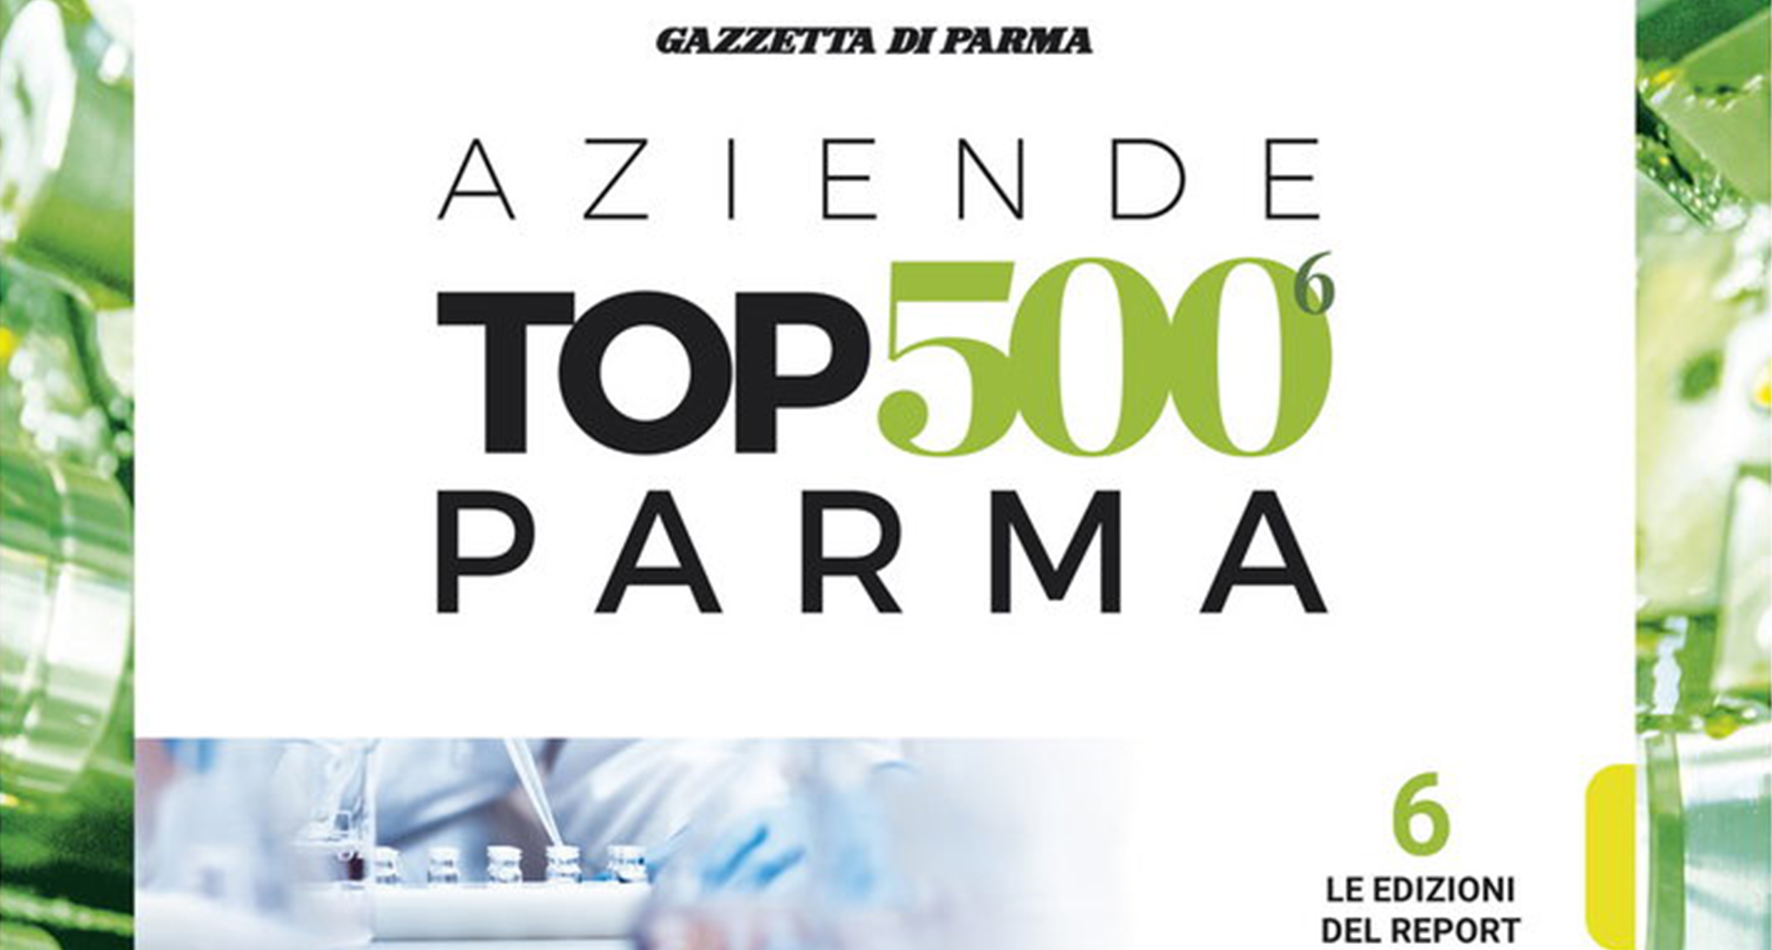 Top 500 - Parma Companies. Mag Data under the spotlight once again